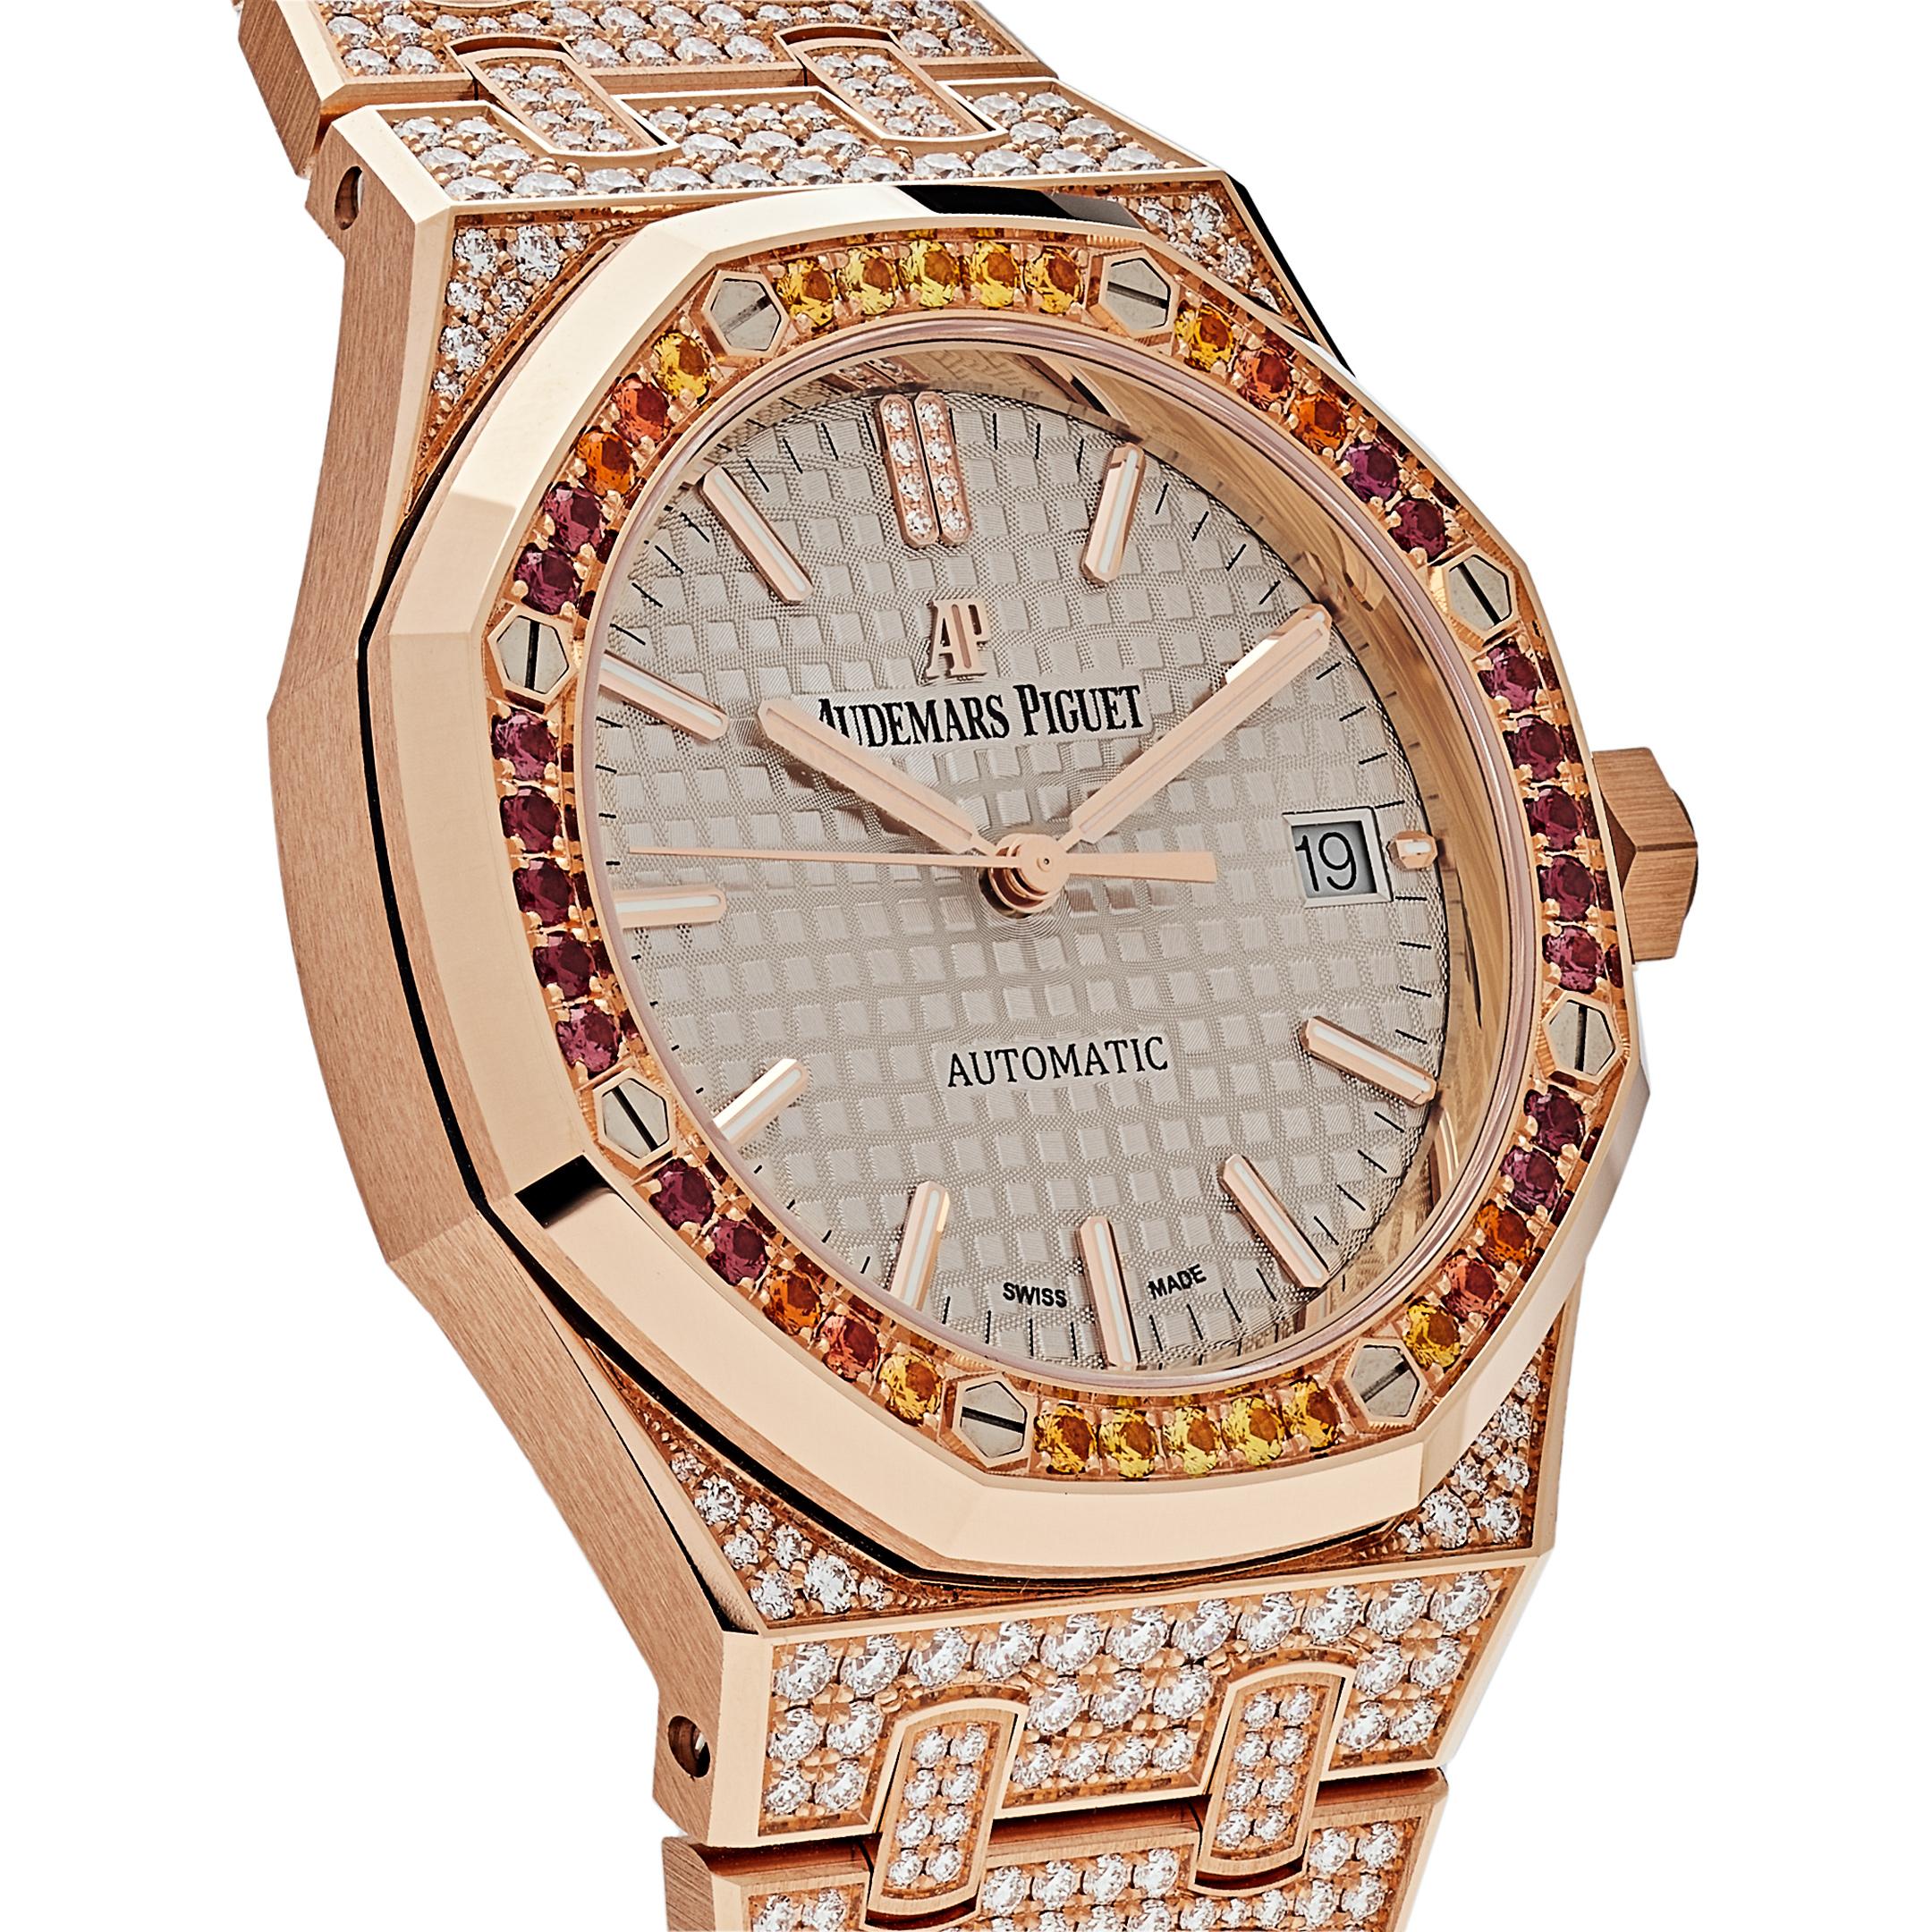 Introducing an impressive addition to Audemars Piguet's Royal Oak collection; The 18-carat pink gold 37mm case of this watch is paved with 124 brilliant-cut diamonds, while the bezel adorns 40 yellow sapphires, red garnets and orange spessartite